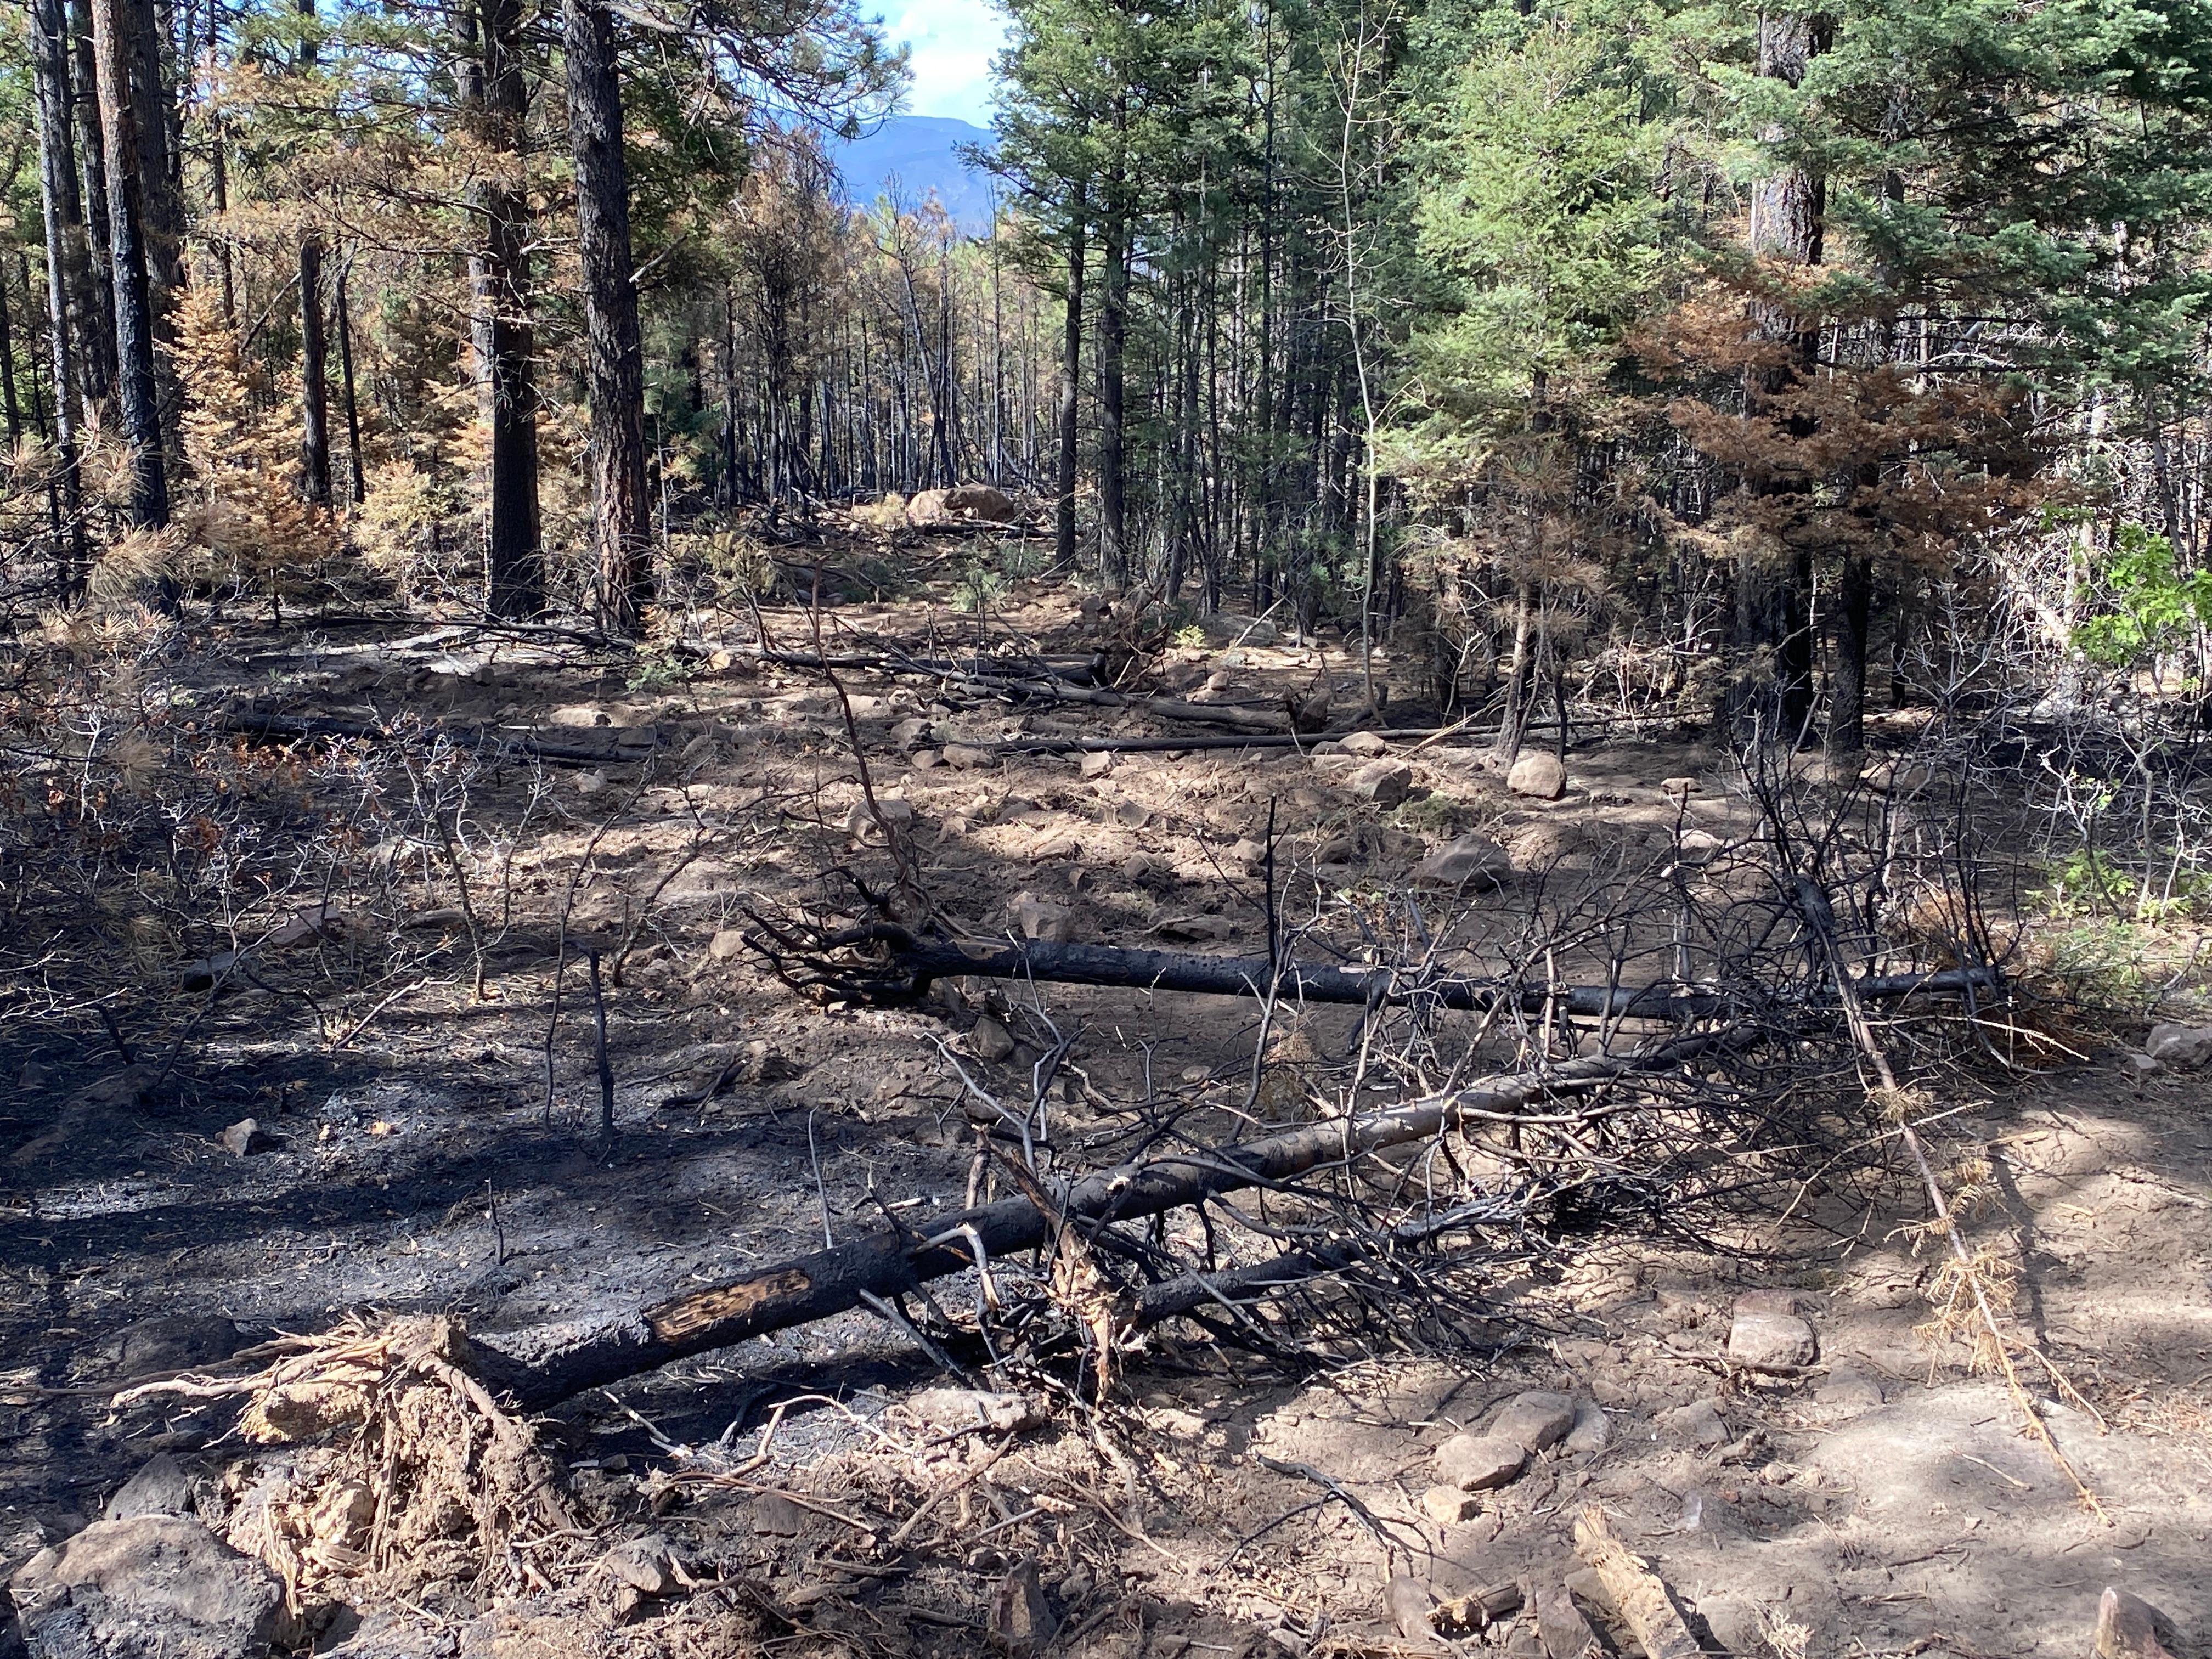 Forest area with dozer line down the center of image.  Dozer line has rocks land burn trees on their sides to cover the dozer line.  Mix of burned and unburned vegetation.